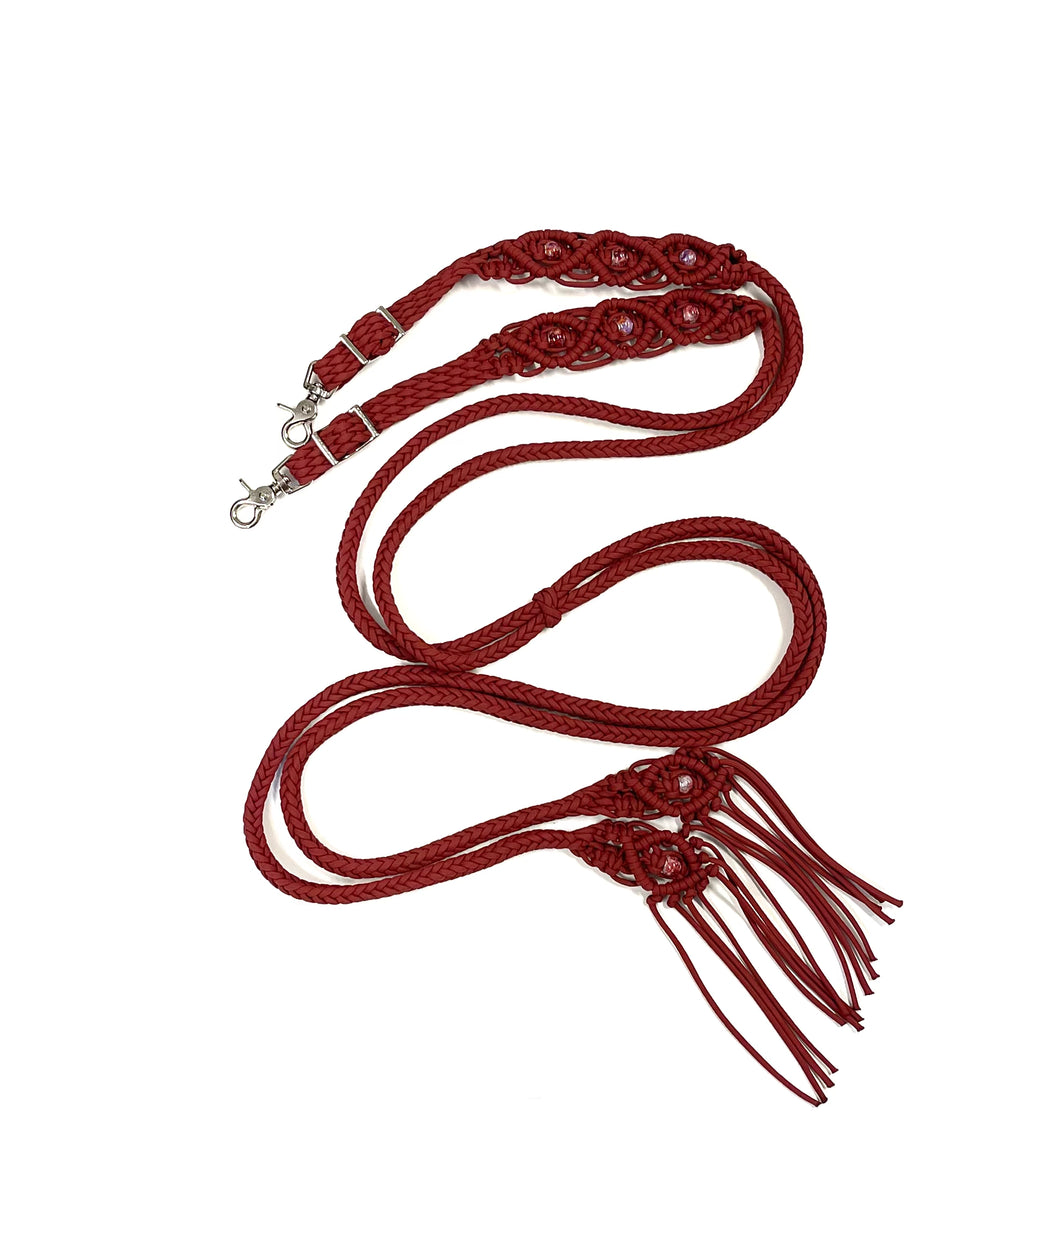 Fancy braided split reins in crimson with European painted glass beads...beautiful yet practical